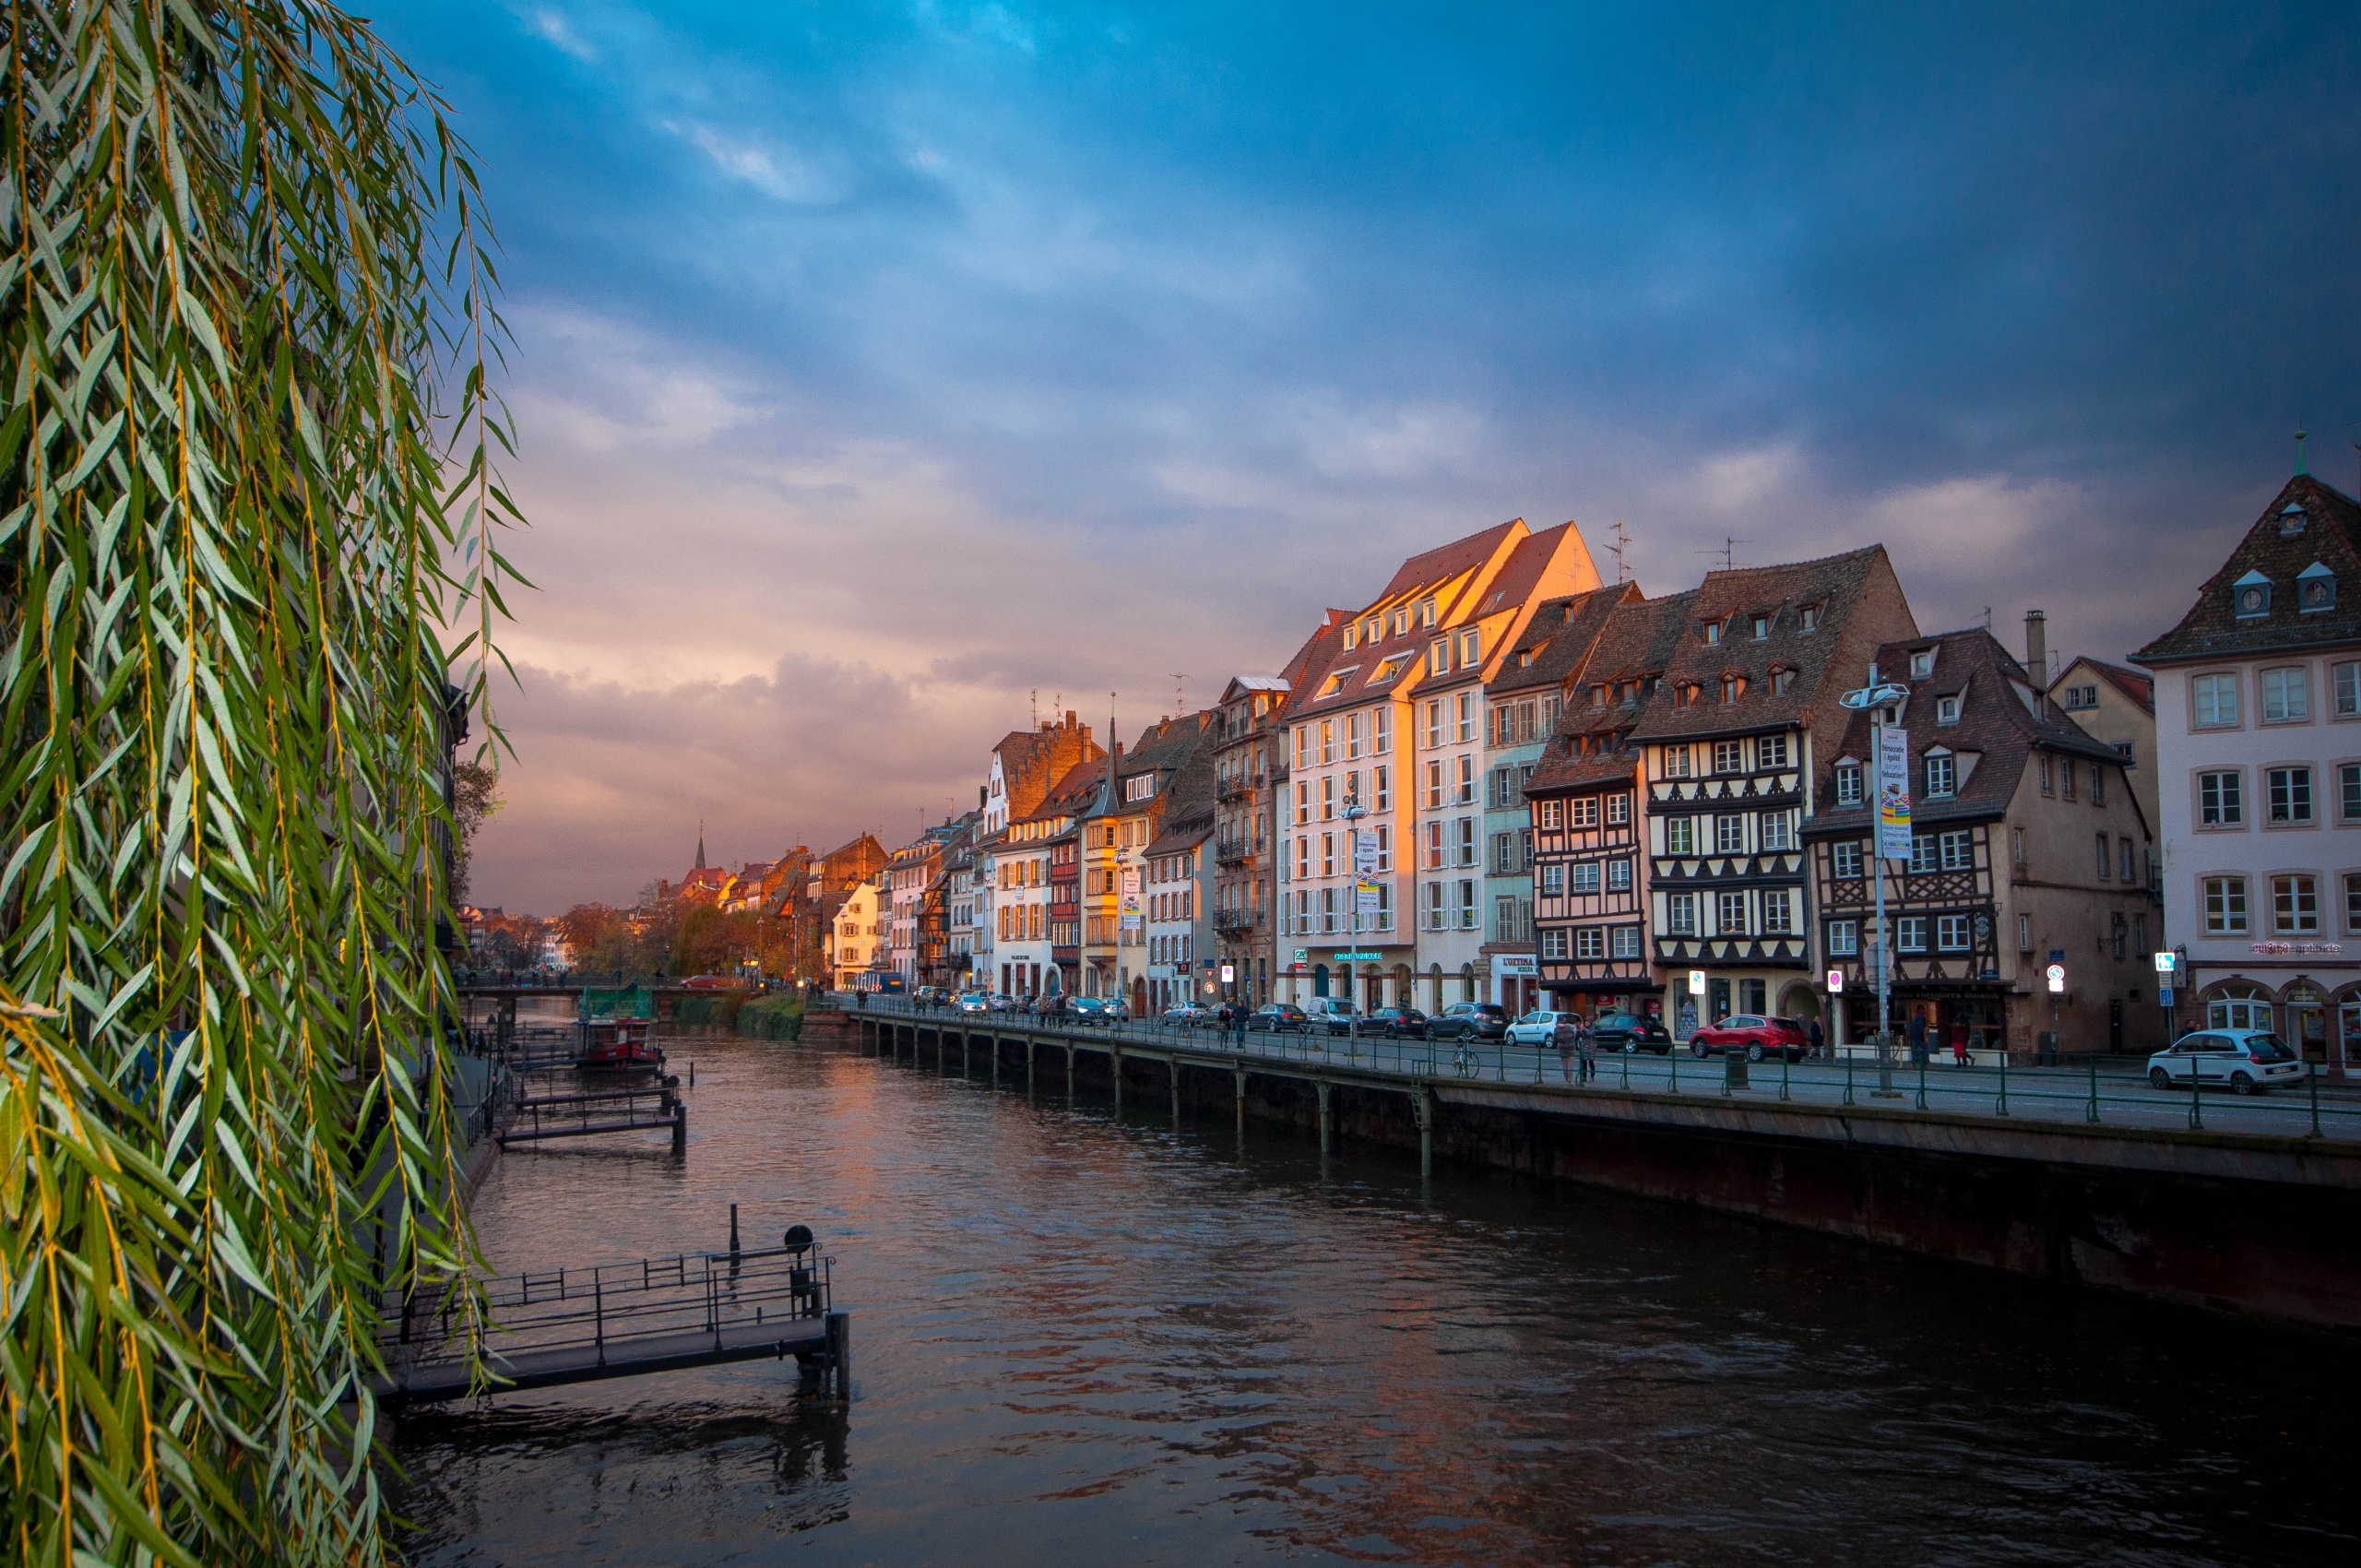 man made, strasbourg, branch, building, canal, car, city, france, house, cities